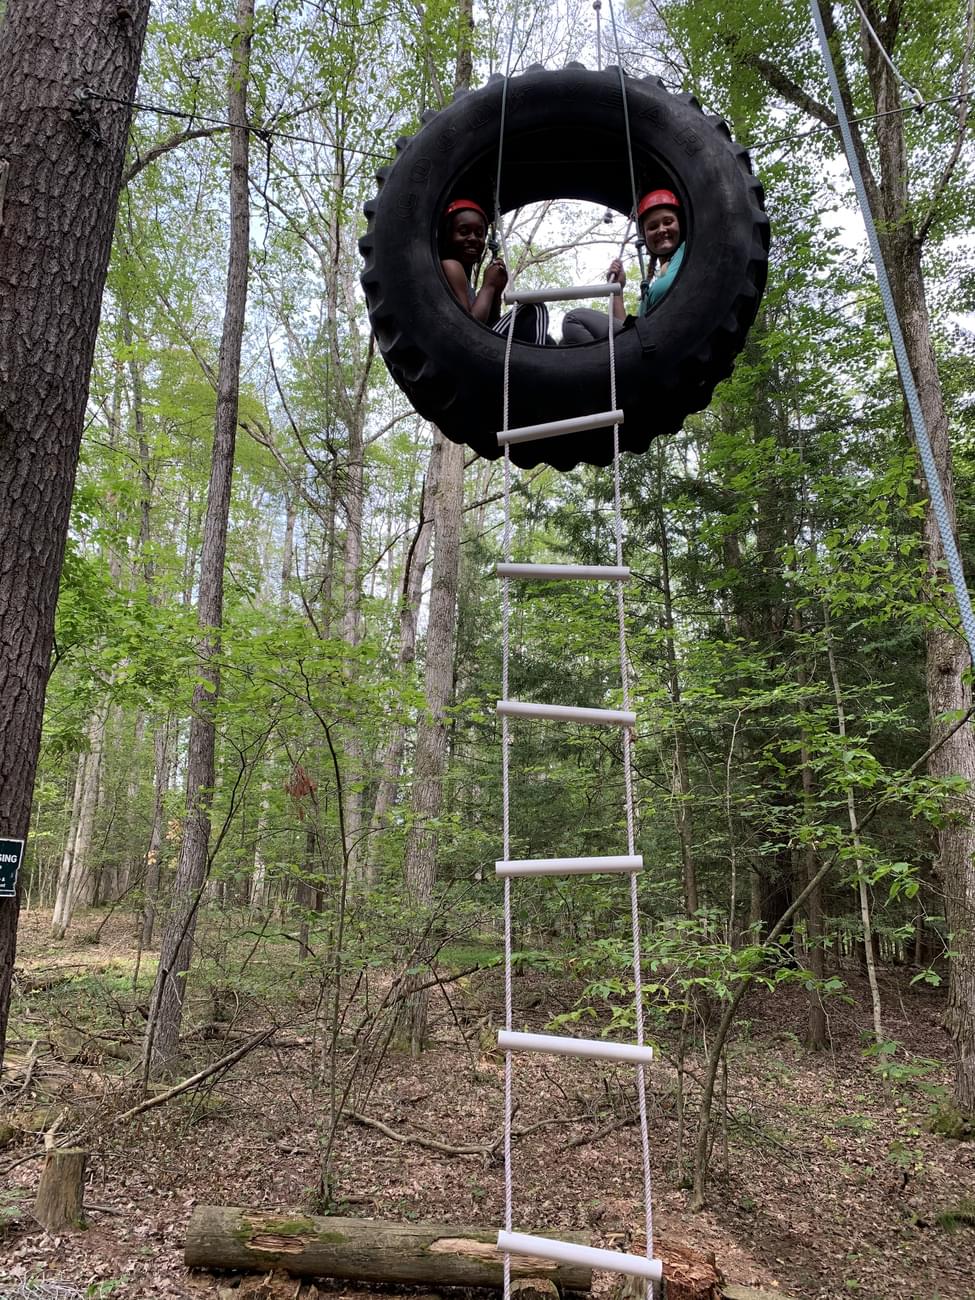 Two students in hanging tire on ropes course.